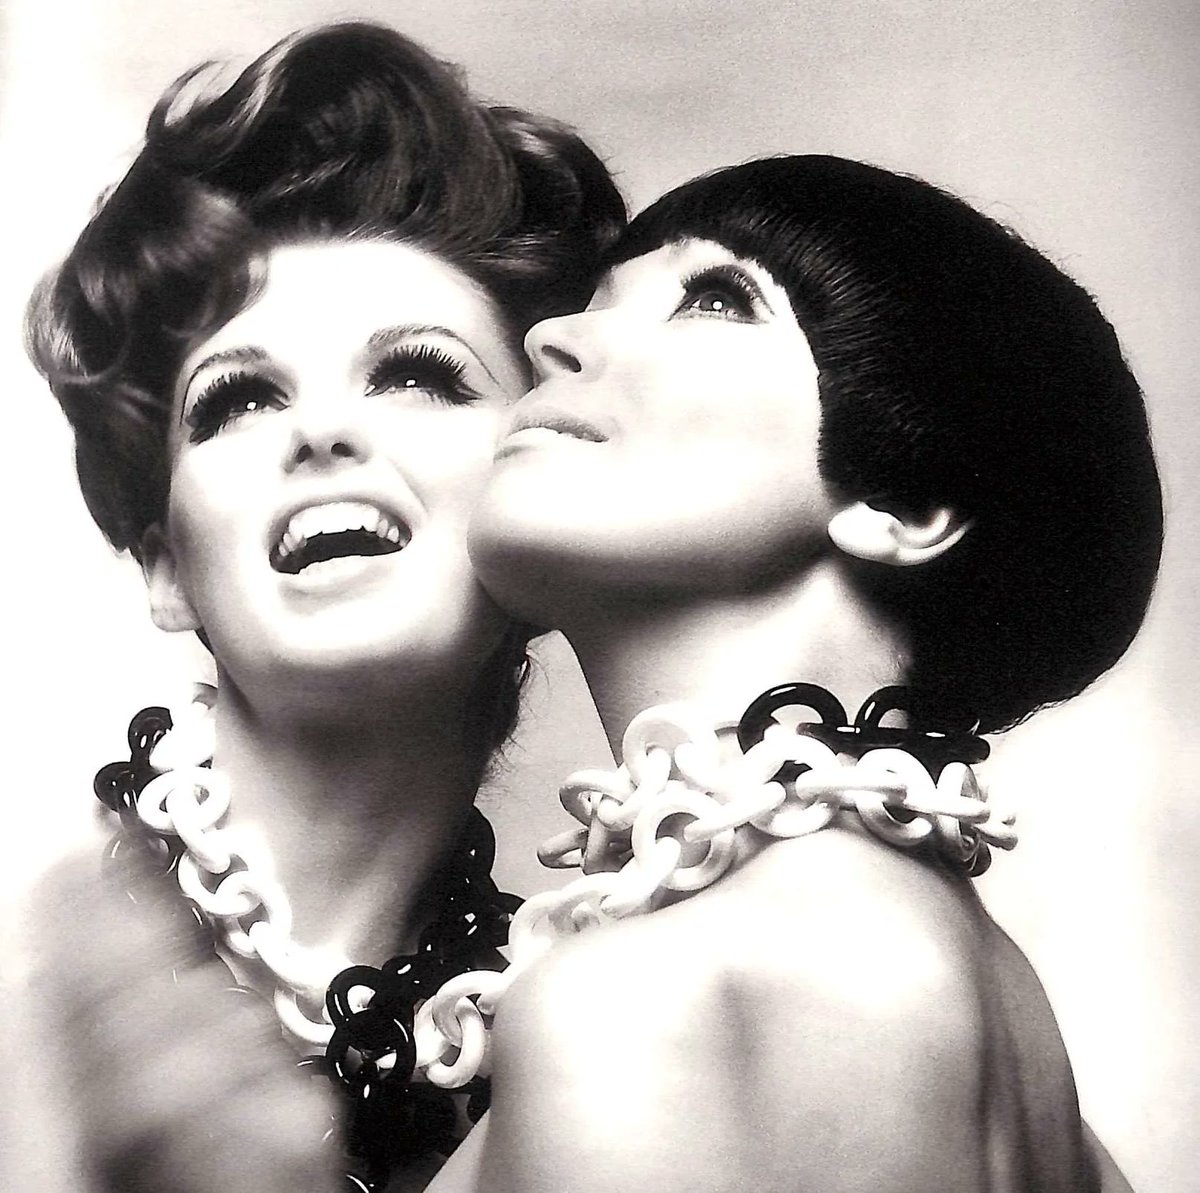 #fashionfriday That 60's Style - Dorothea McGowan and Melanie Hampshire, hairstyles by Enny of Italy and Vidal Sassoon, necklaces by Arpad, Harper’s Bazaar, 1965, photo Melvin Sokolsky